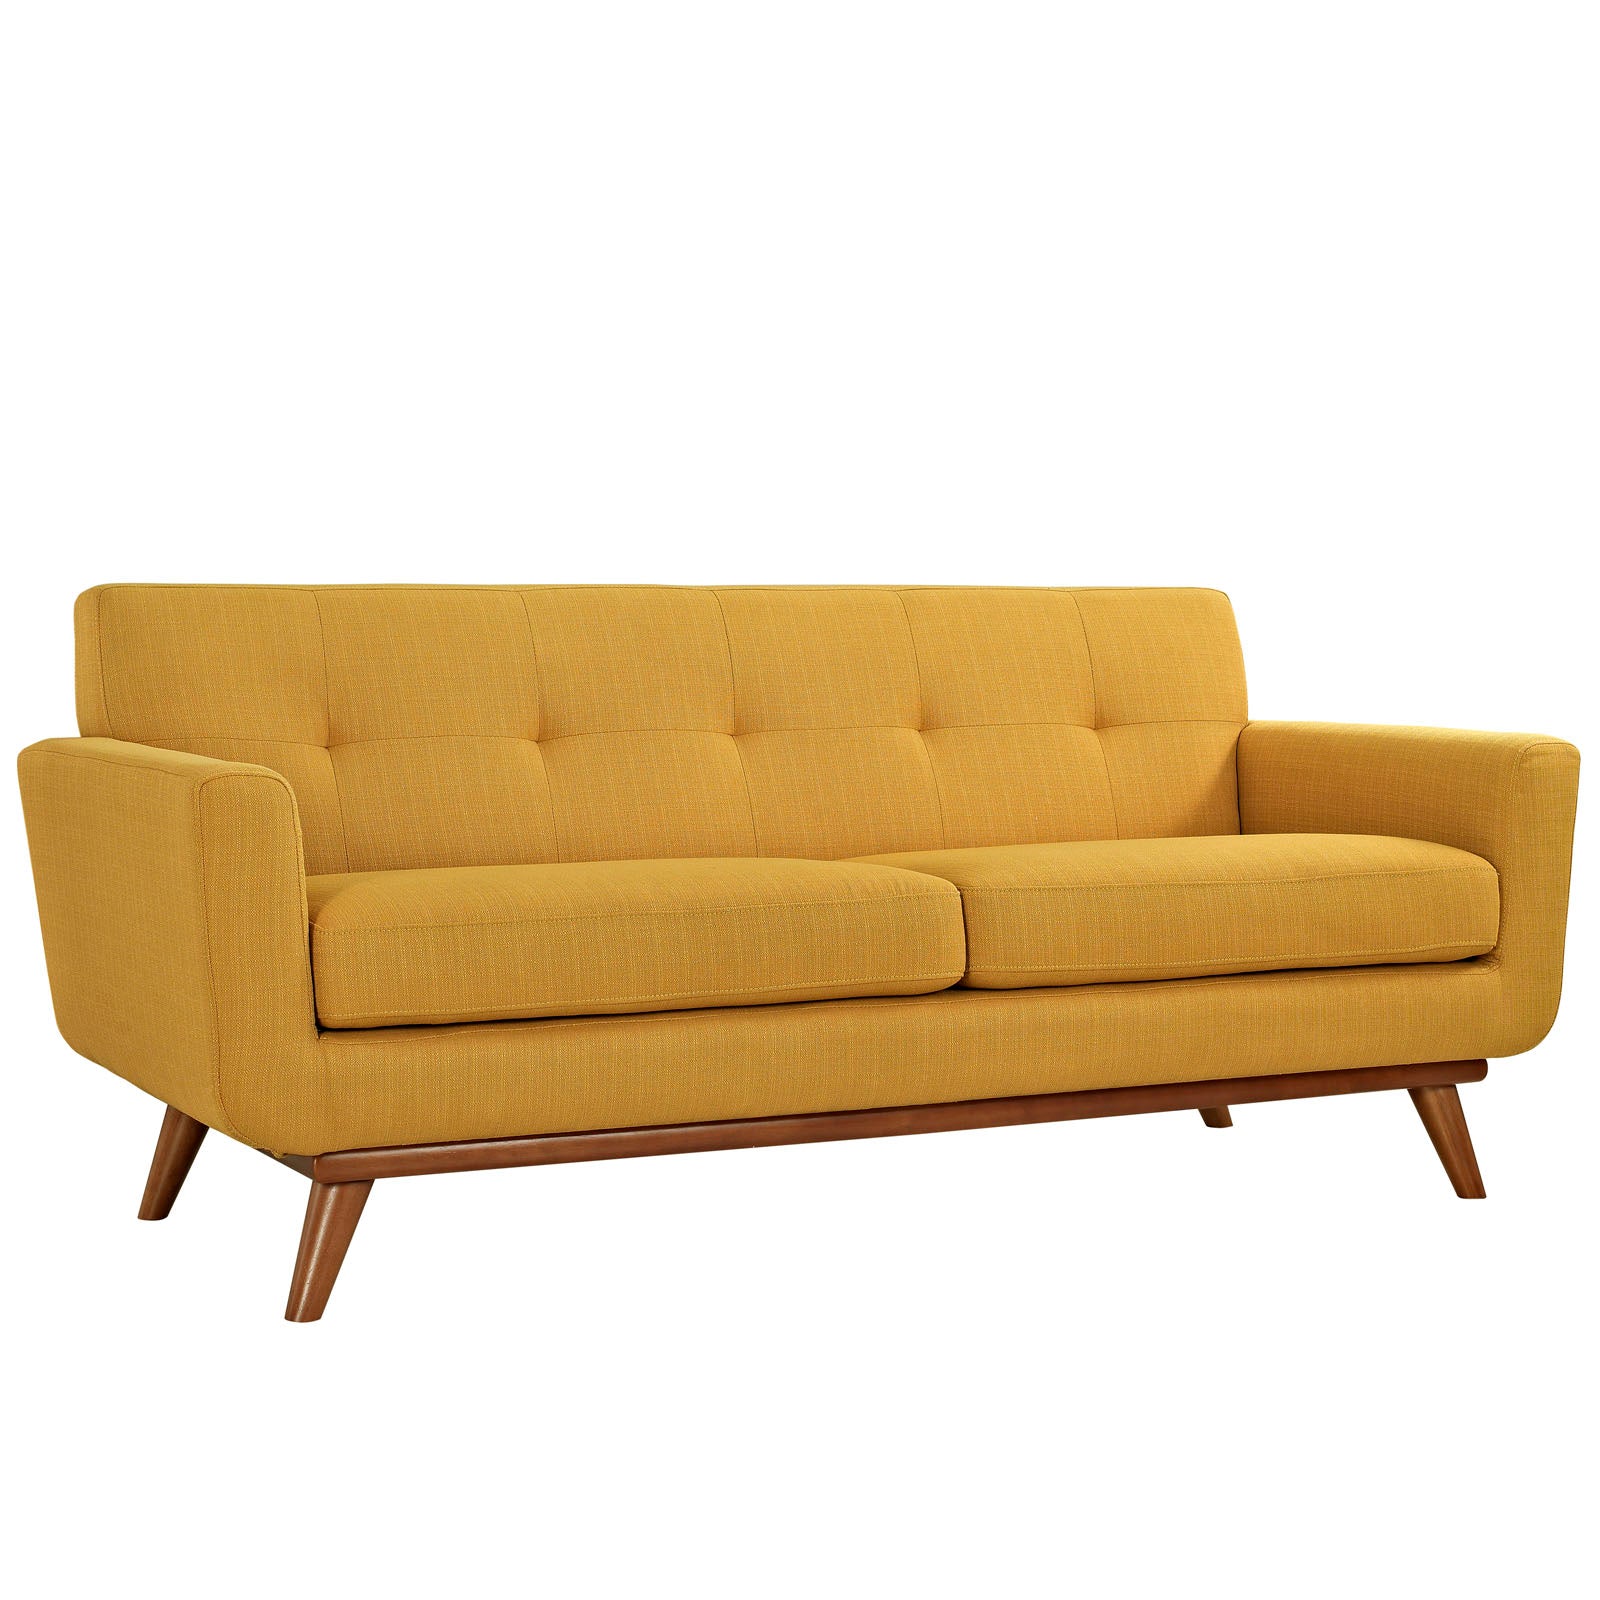 Modway Living Room Sets - Engage Loveseat and Sofa Set of 2 Citrus